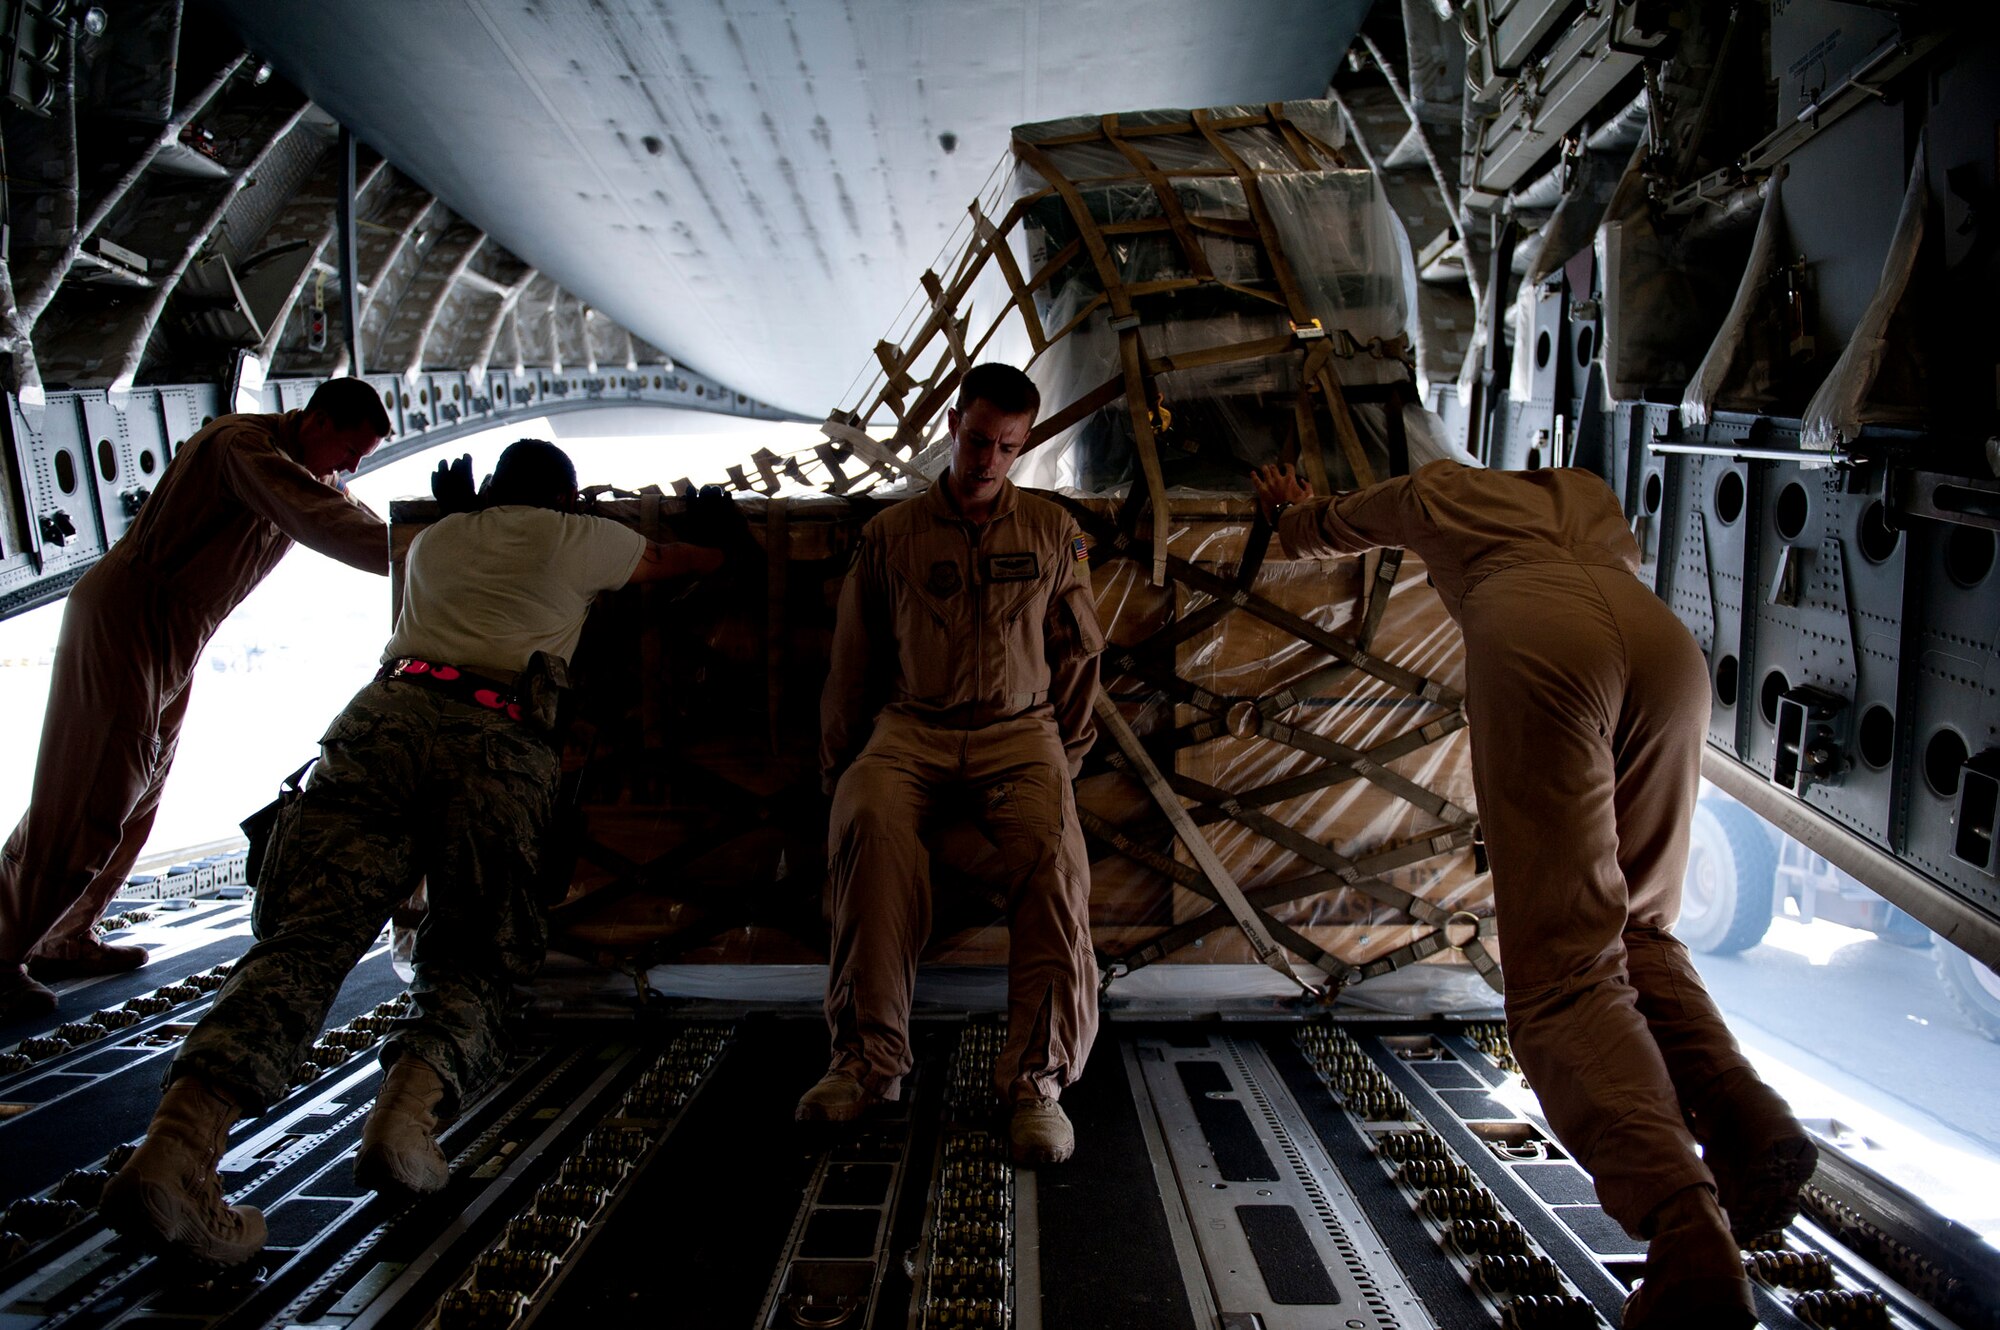 An 817th Expeditionary Airlift Squadron aircrew and 451st Expeditionary Logistics Readiness Squadron aerial port flight members unload a C-17 Globemaster III aircraft Aug. 18, 2011, at Kandahar Air Field, Afghanistan. The 817th EAS crew transported equipment and supplies from Incirlik Air Base, Turkey. (U.S. Air Force photo by Tech. Sgt. Michael B. Keller/Released)